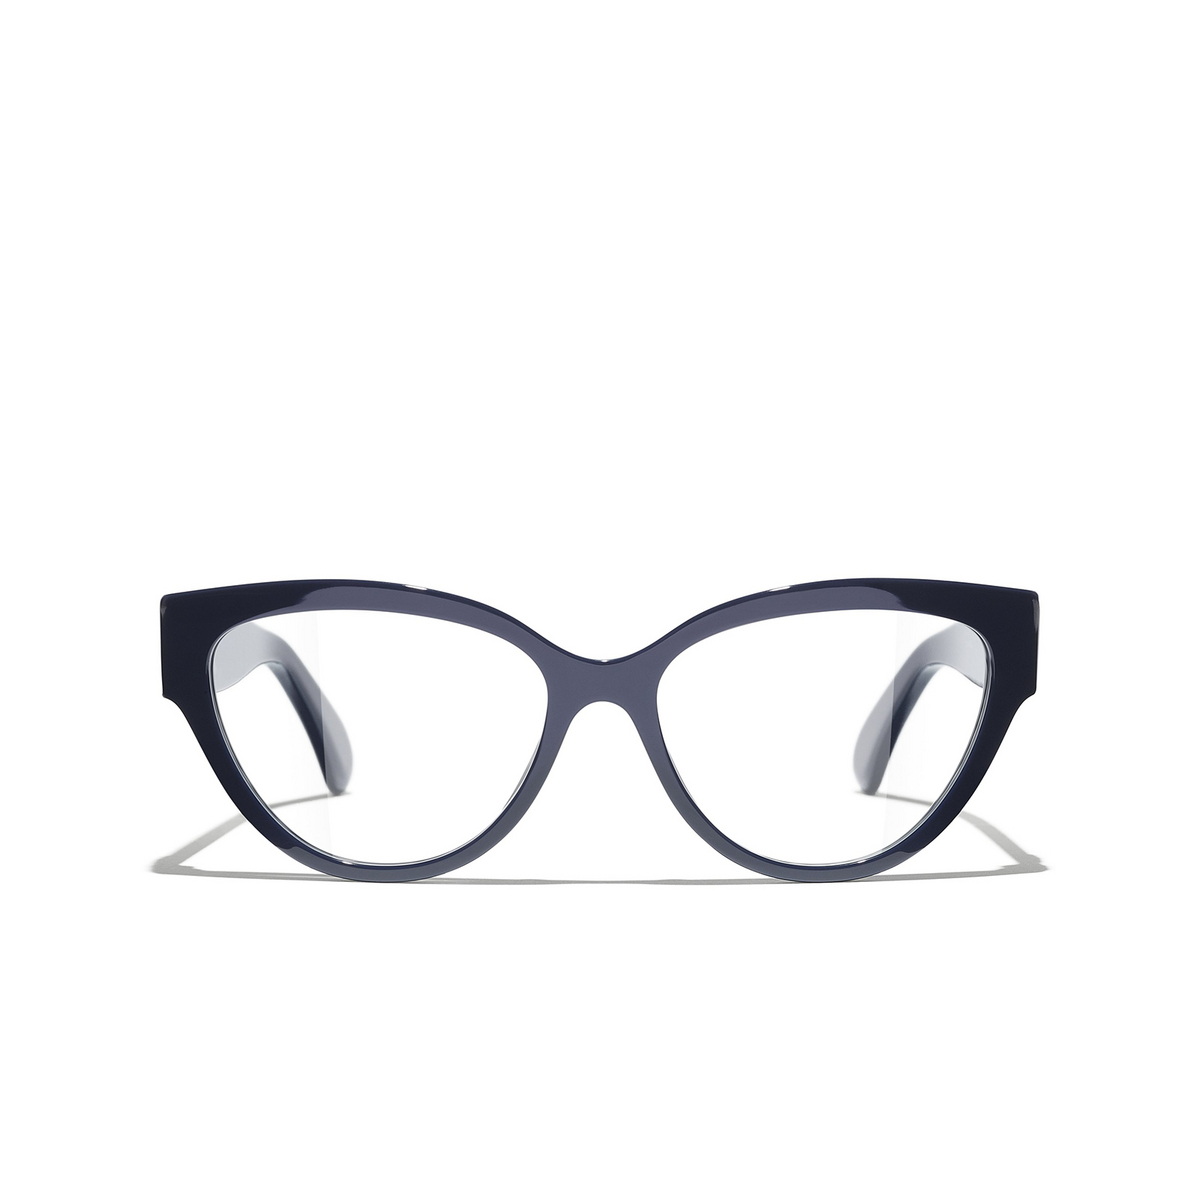 CHANEL cateye Eyeglasses 1643 Blue - front view